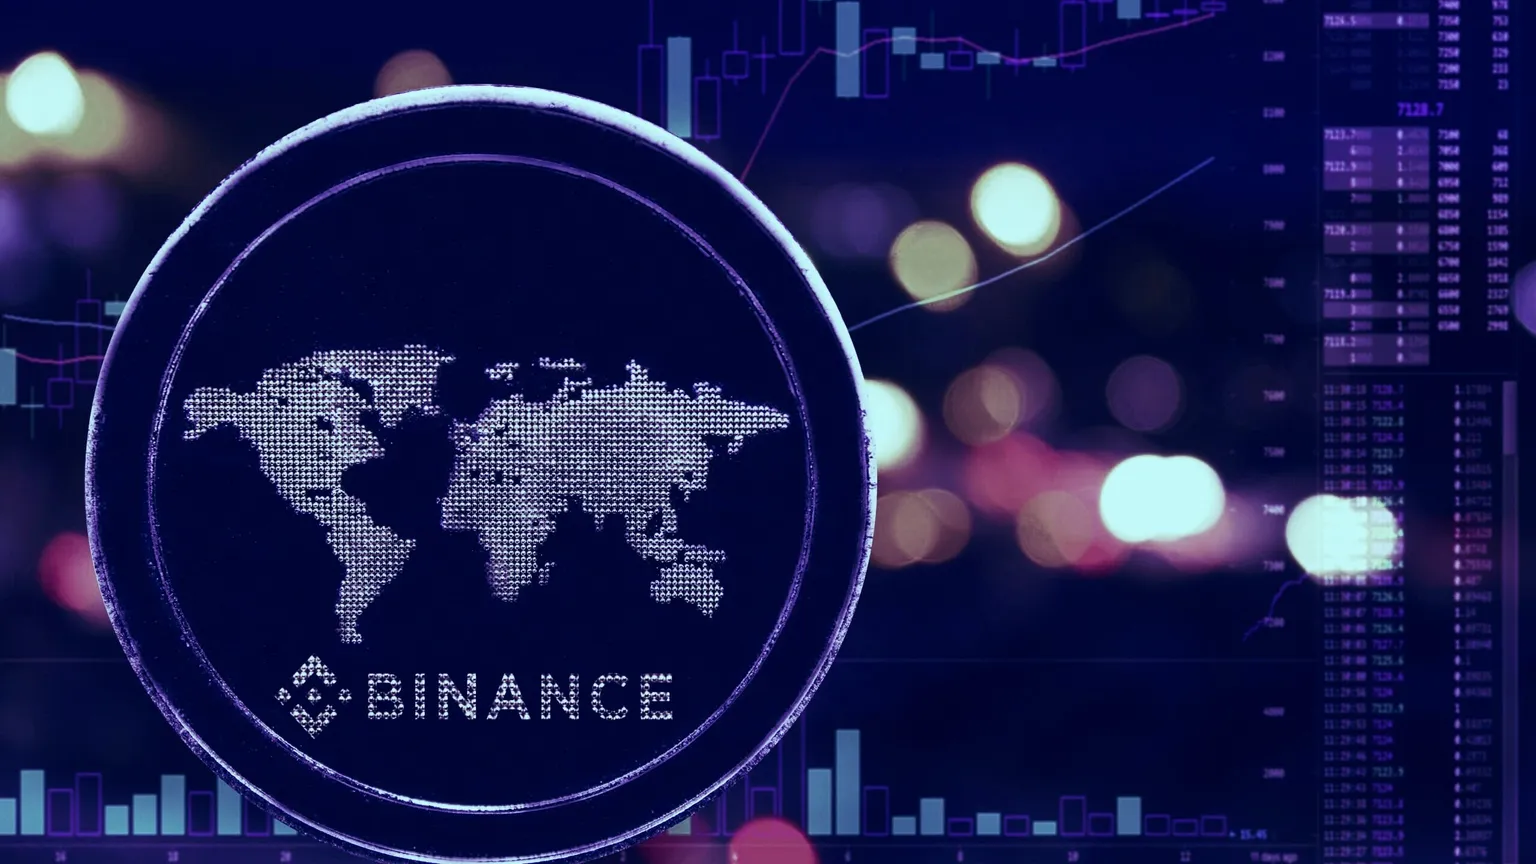 Relations between Binance and the Maltese authorities are "very good," despite appearances to the contrary, according to sources with knowledge of the matter (image: Shutterstock)